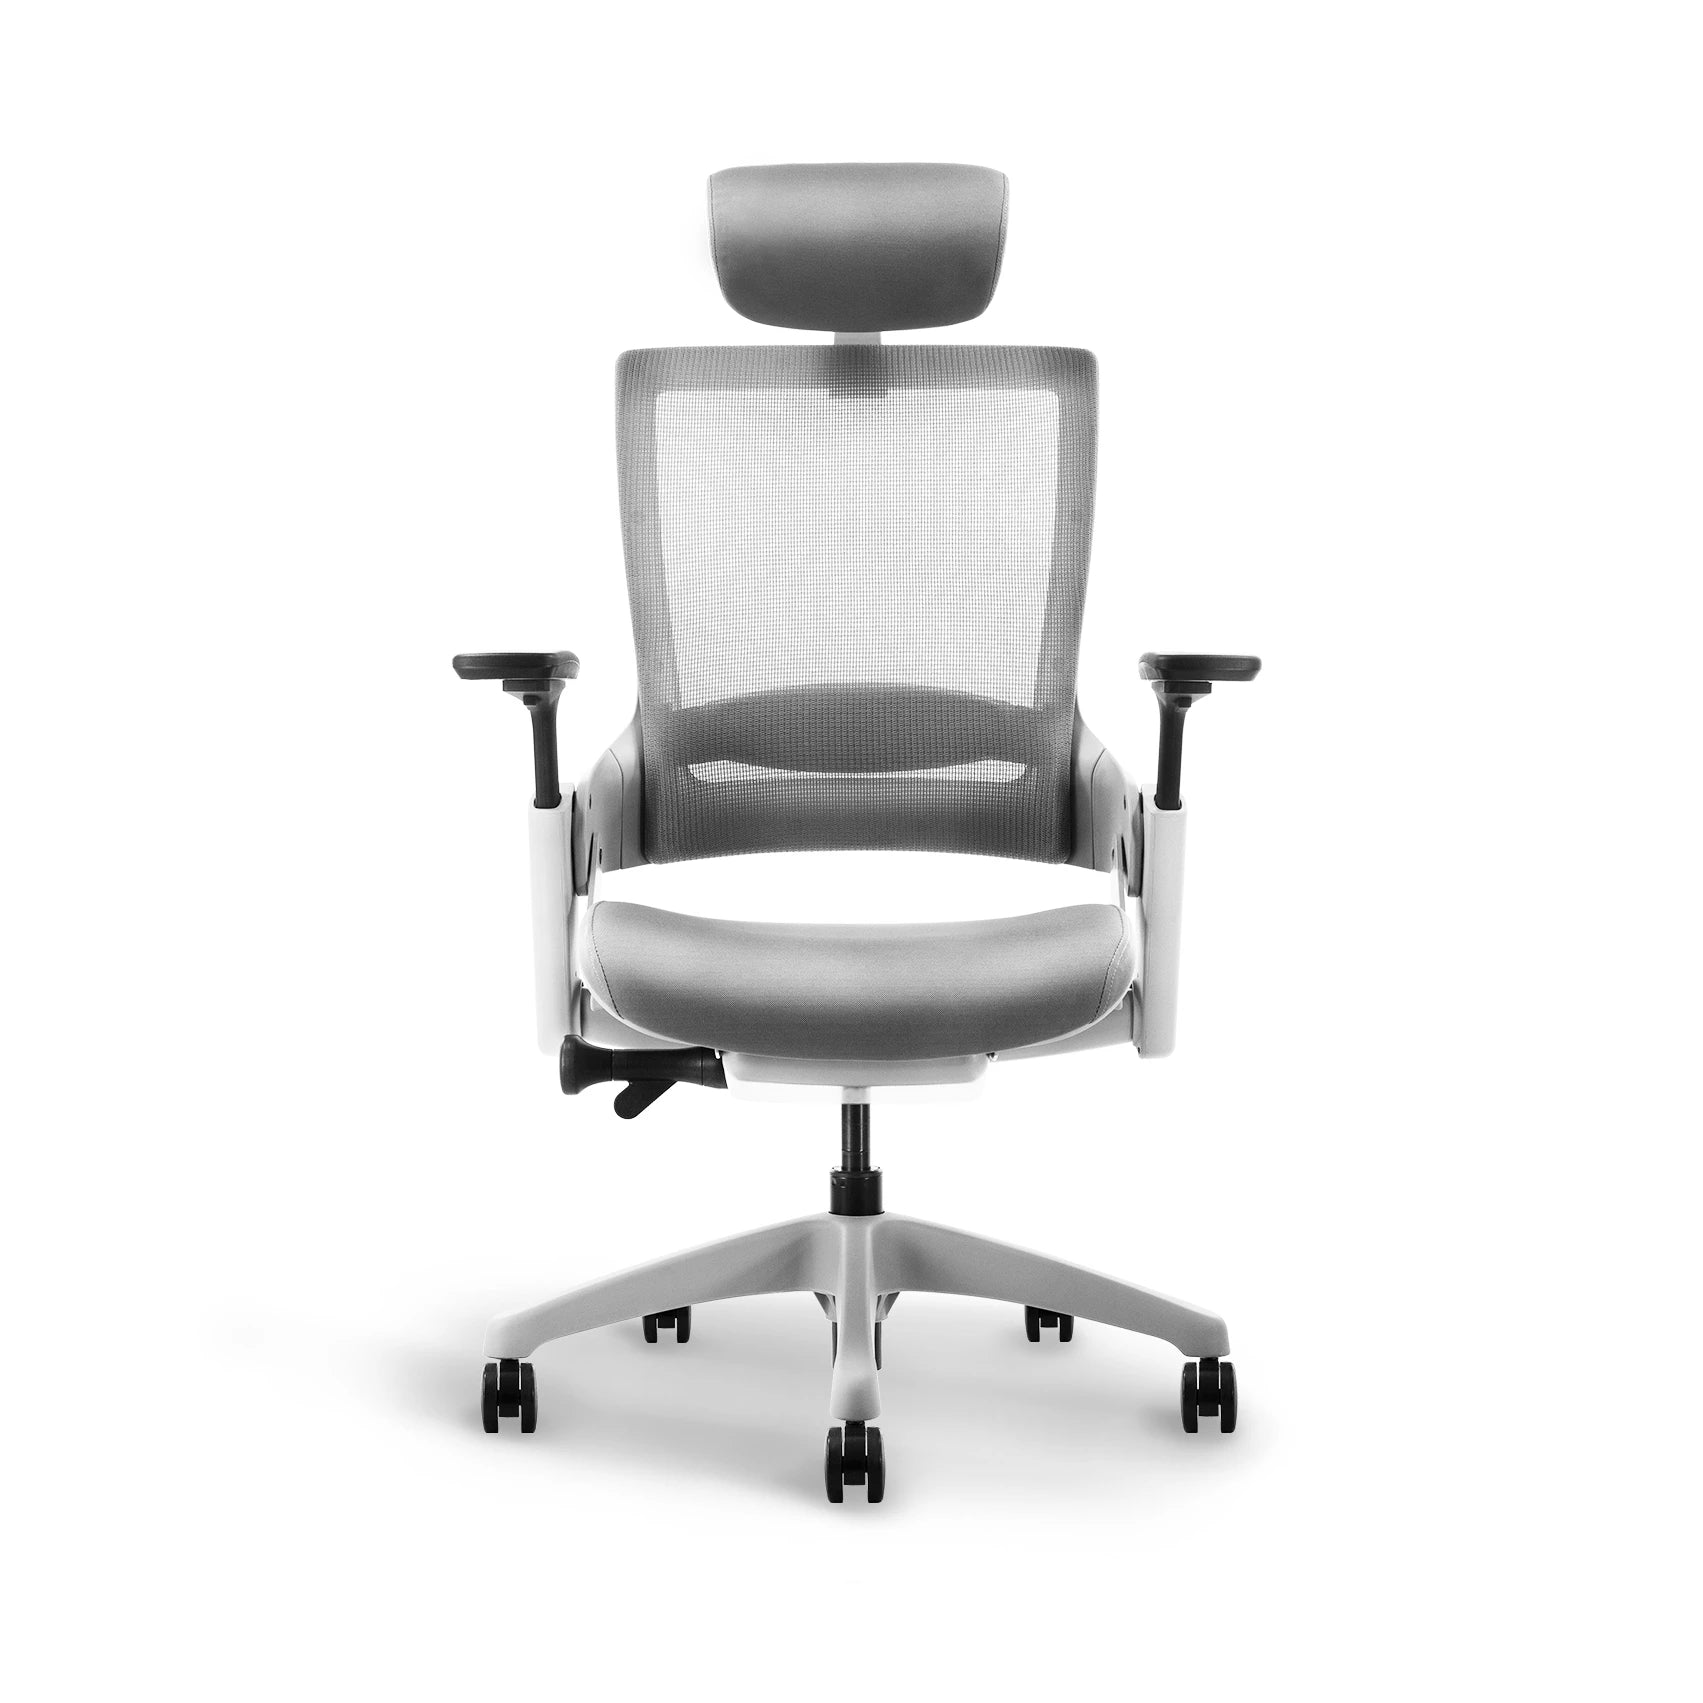 Back view of Flujo Angulo ergonomic chair with lumbar support in grey